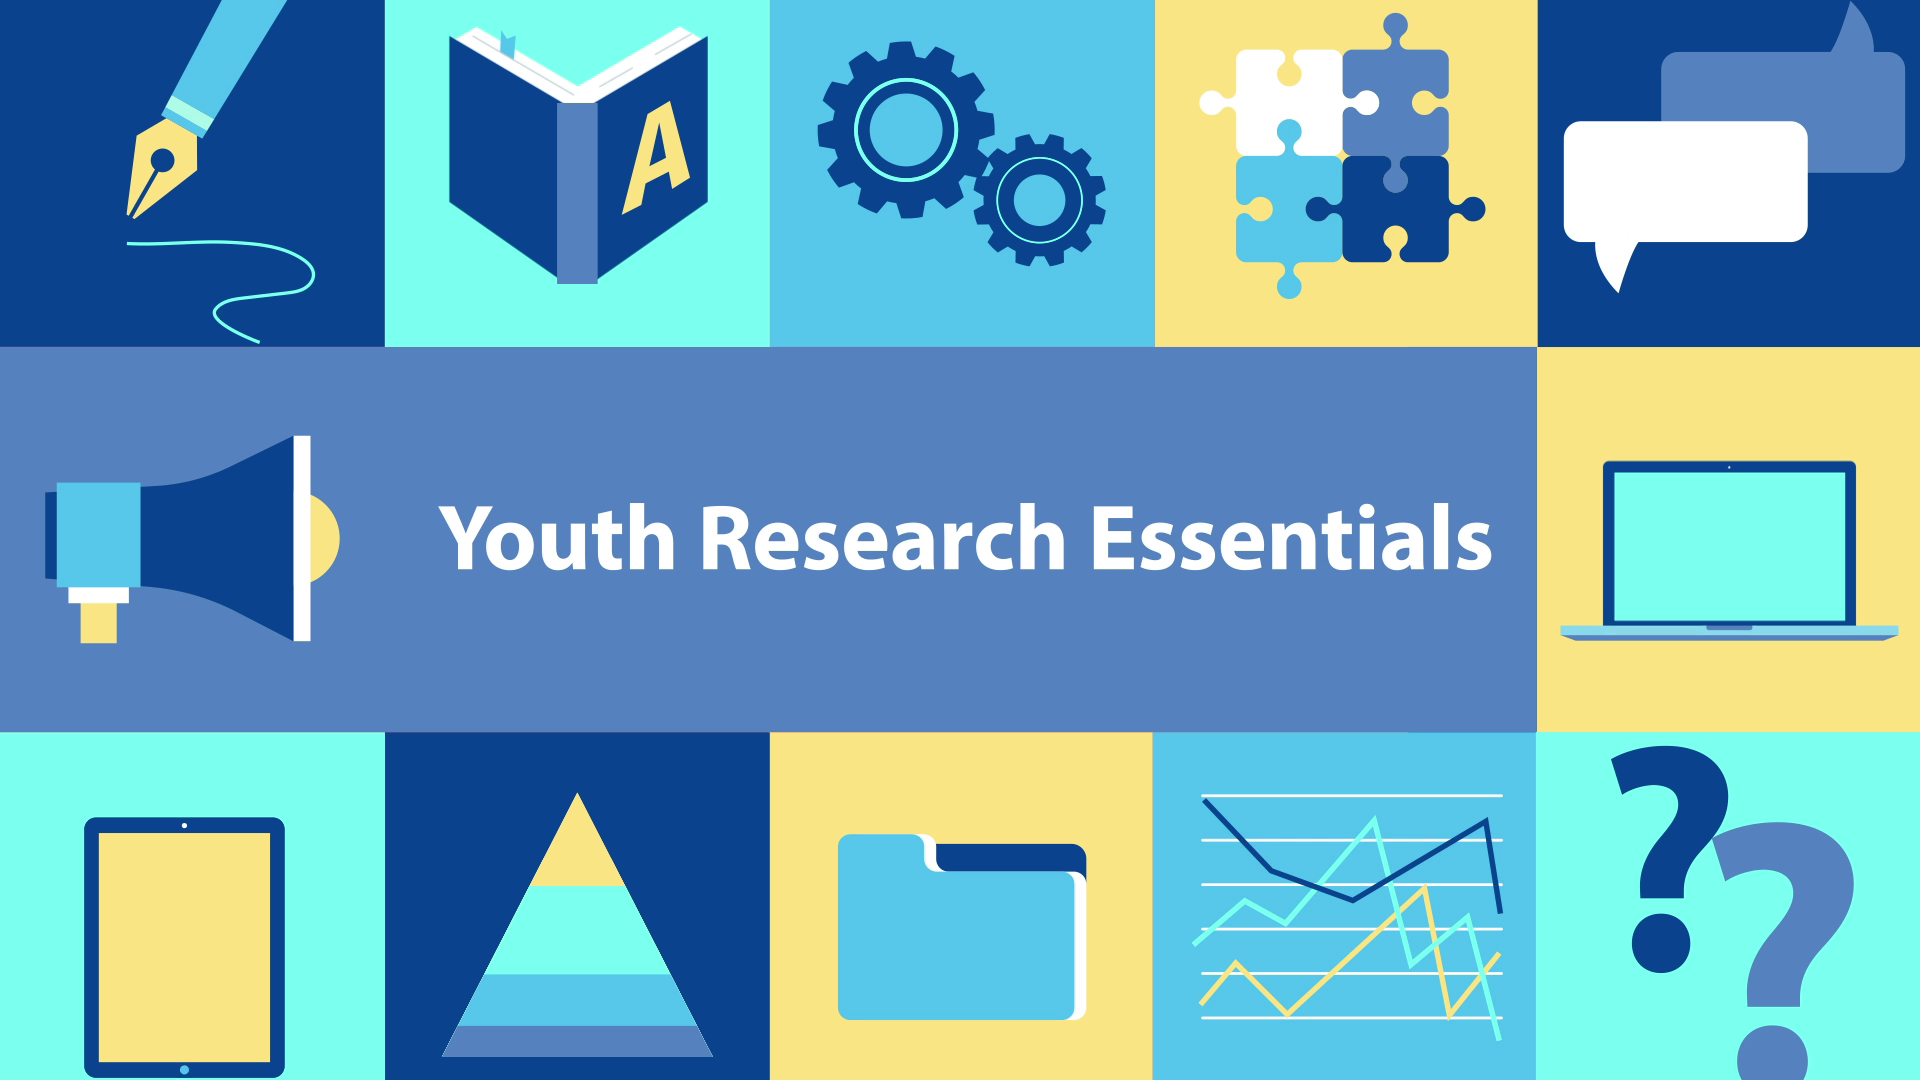 Let’s discover youth research!